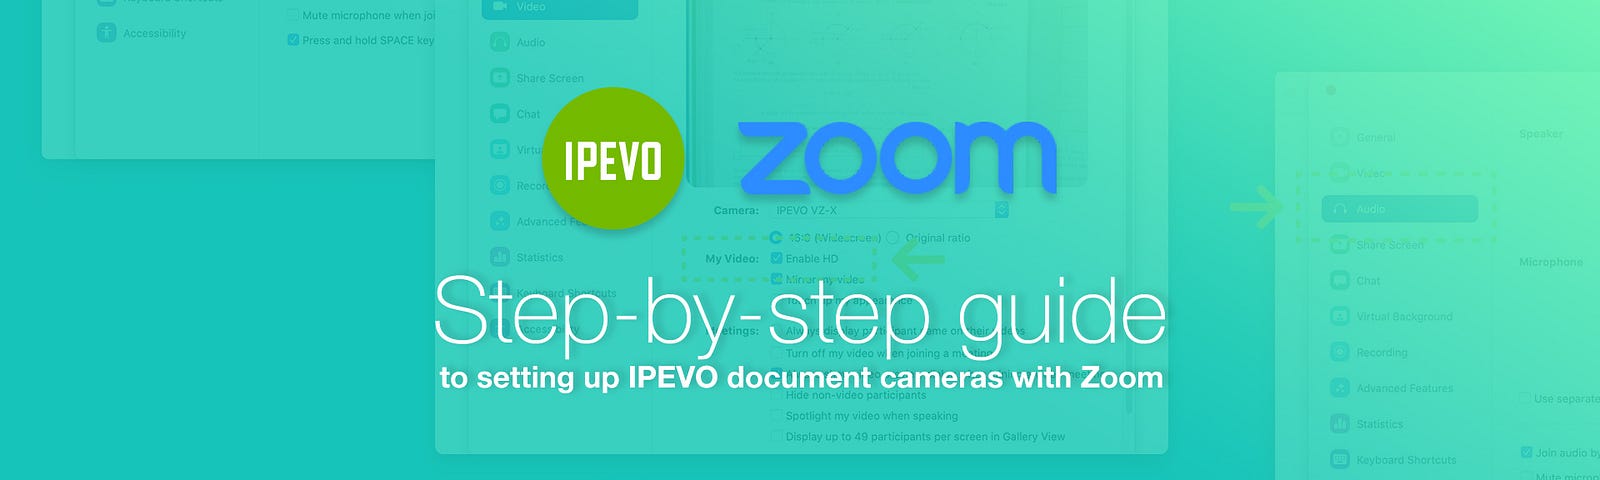 Step-by-step guide to setting up IPEVO document cameras with Zoom